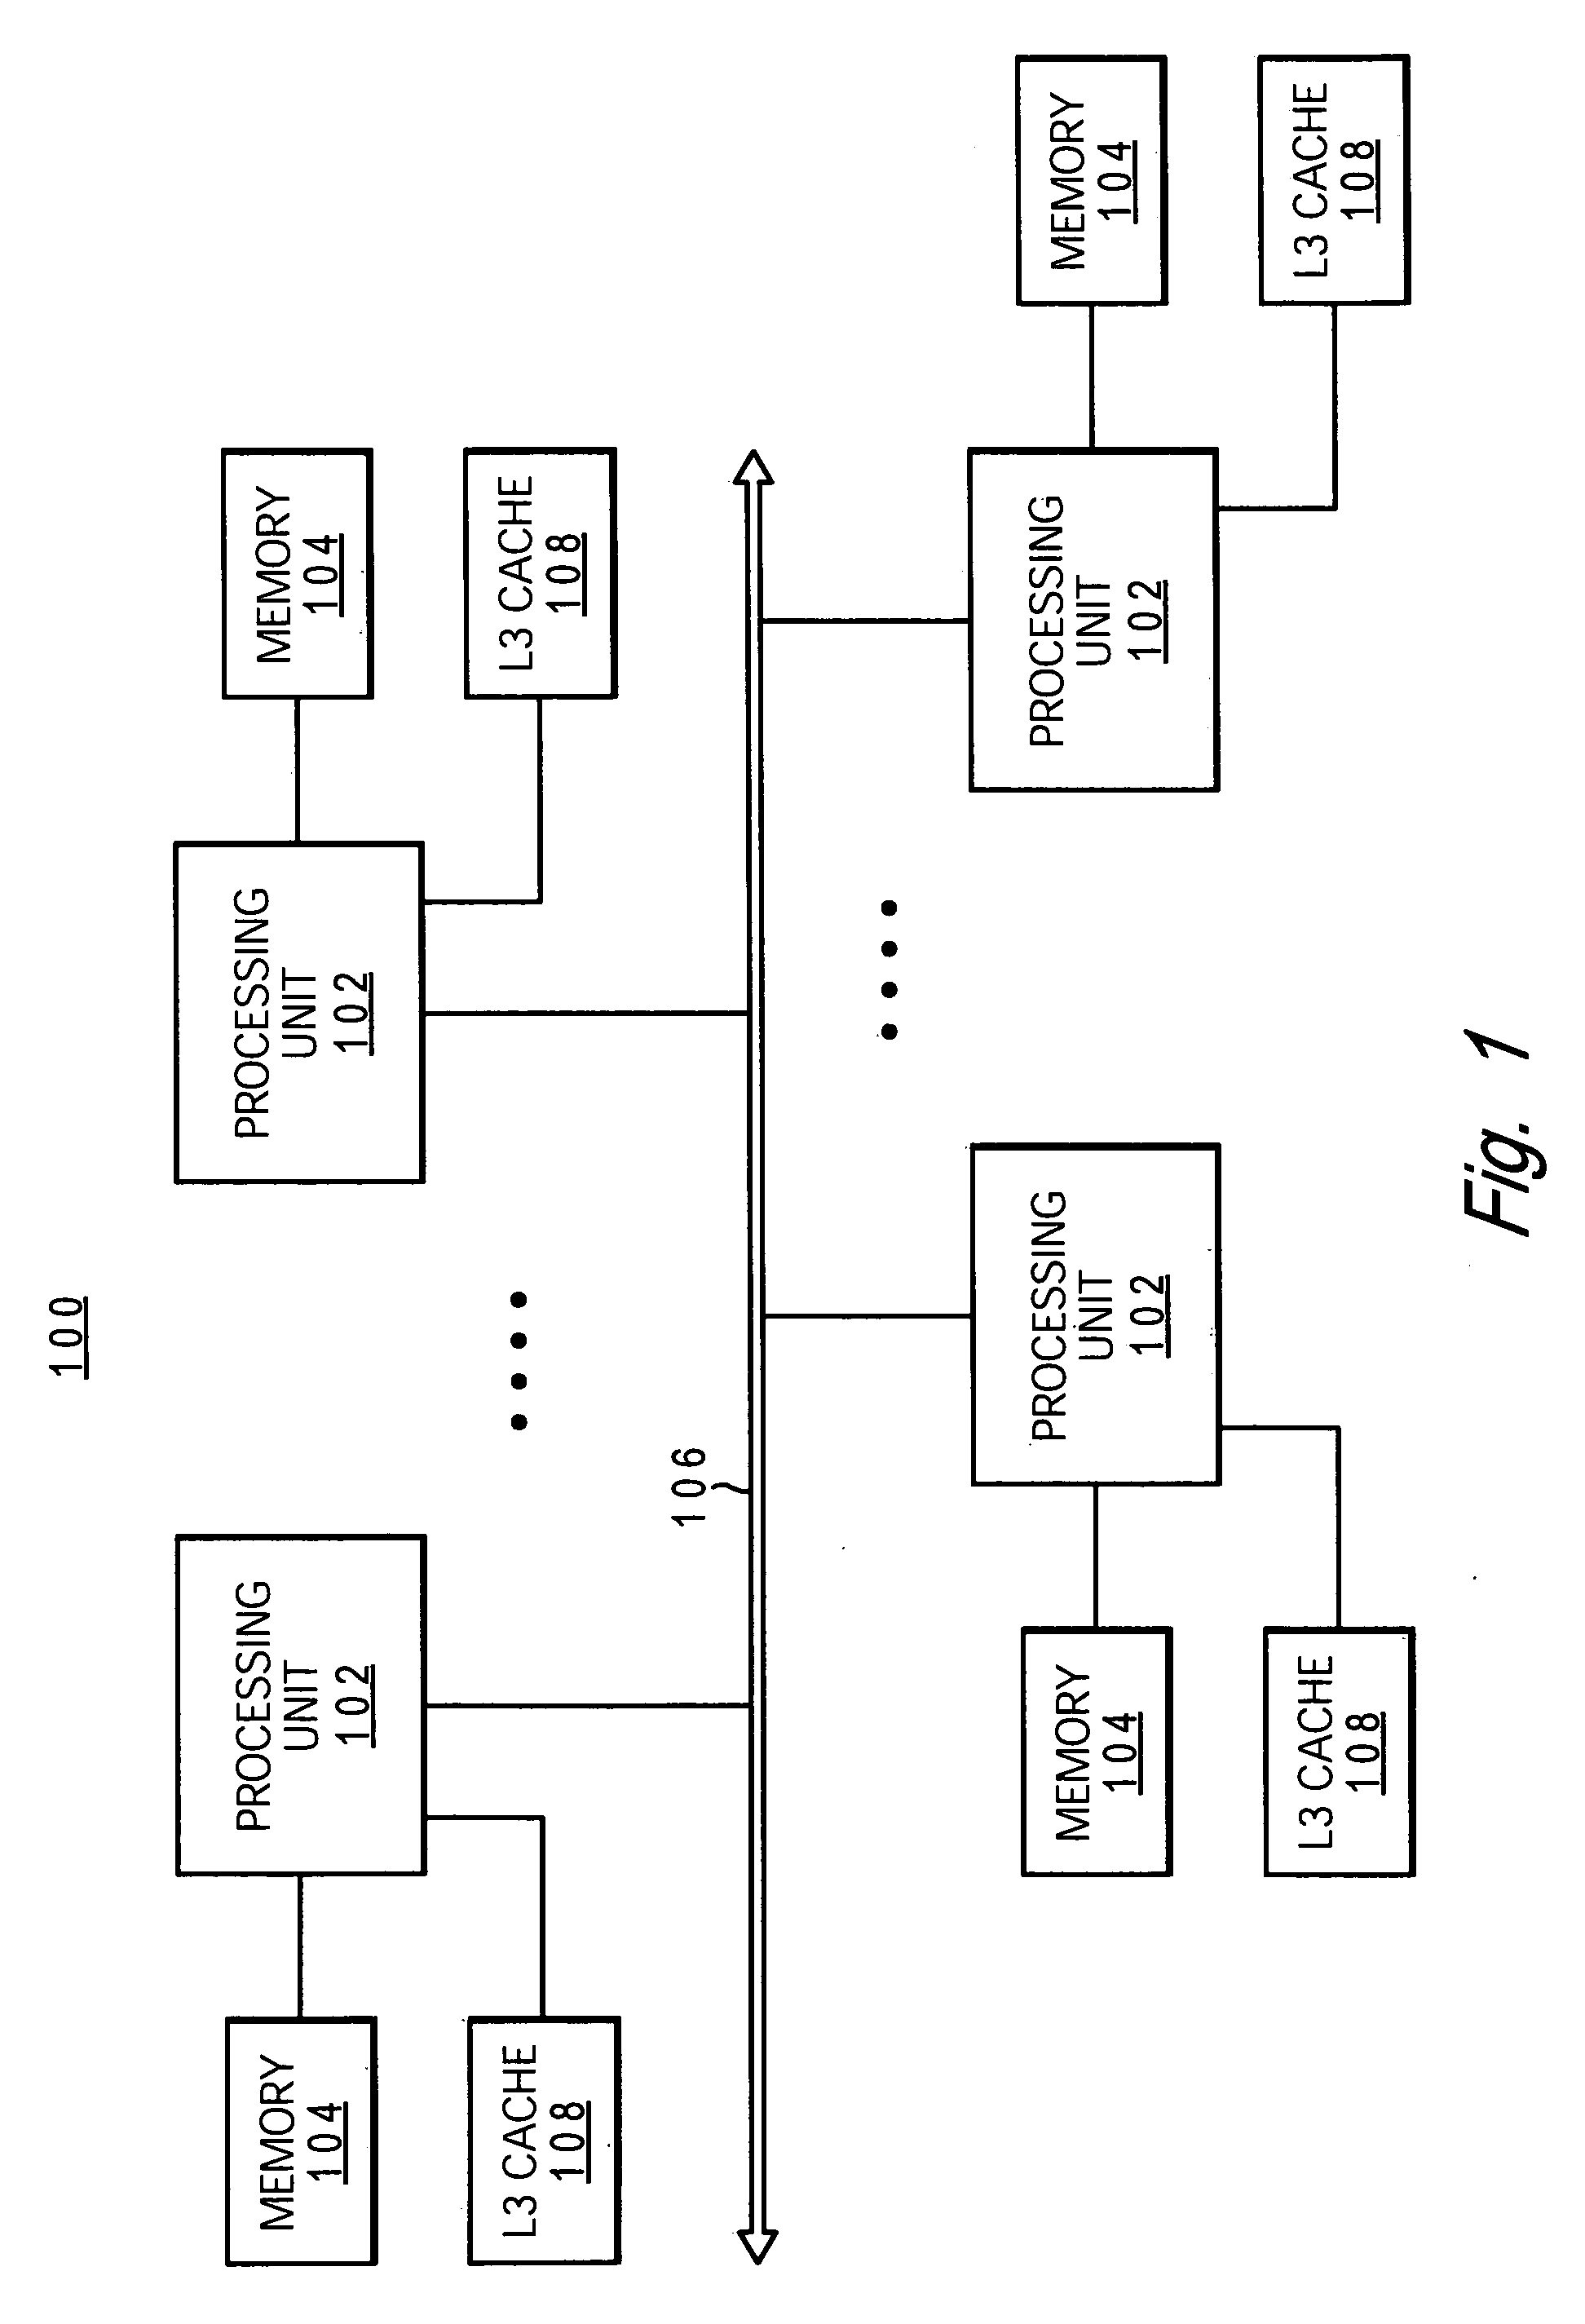 System and method of managing cache hierarchies with adaptive mechanisms